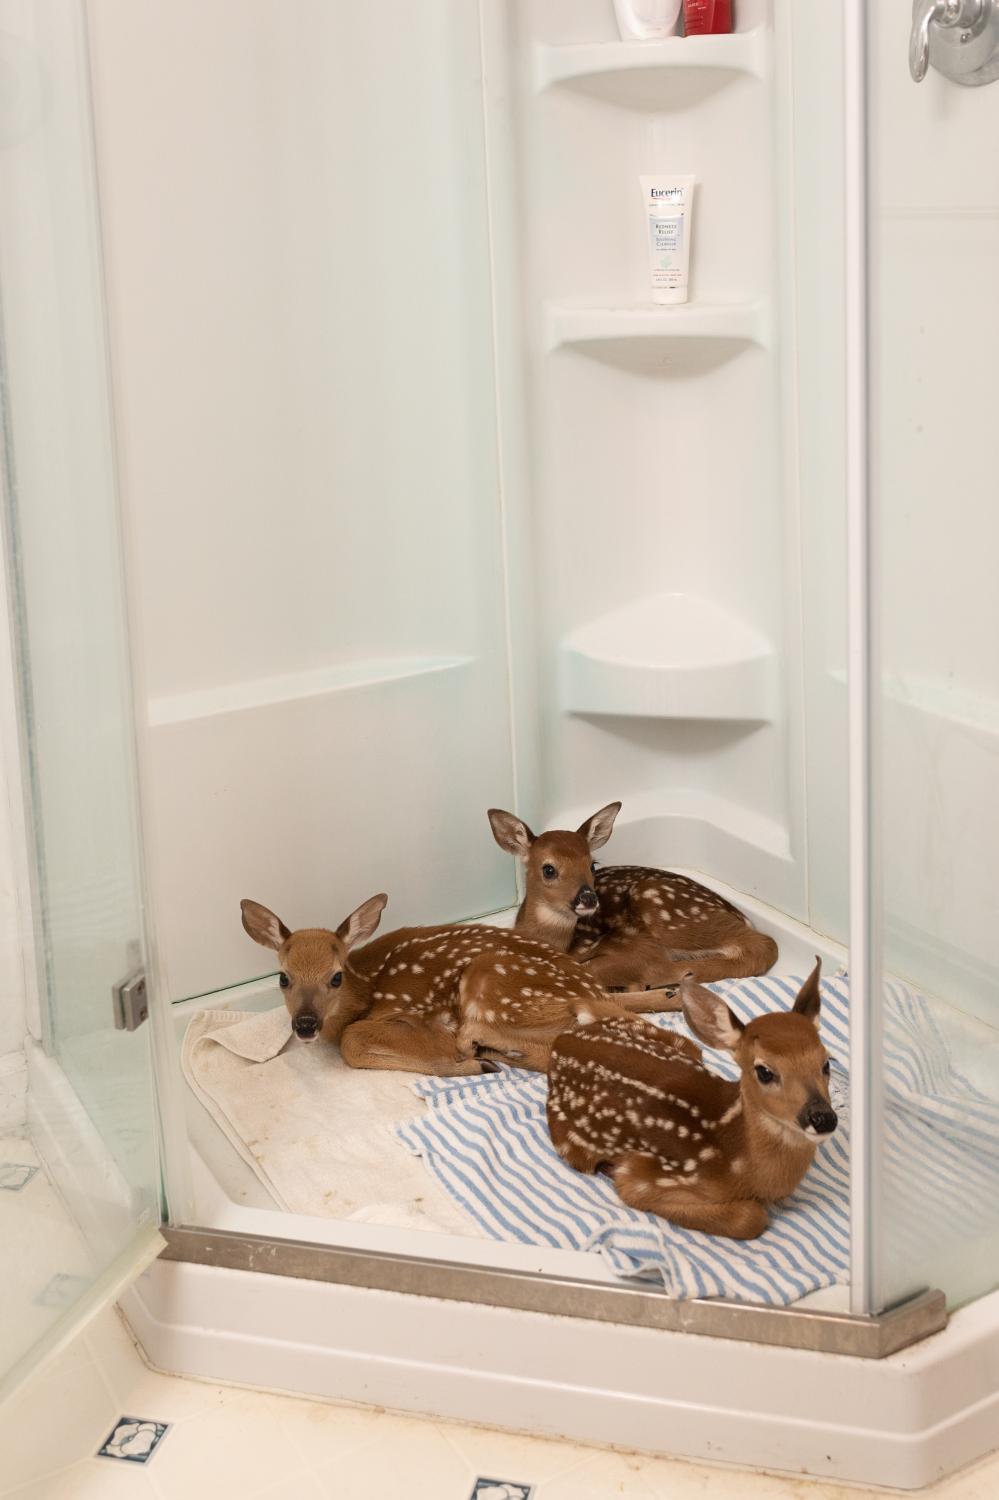 It Takes a Village - Fawns shelter overnight in a volunteer's shower.